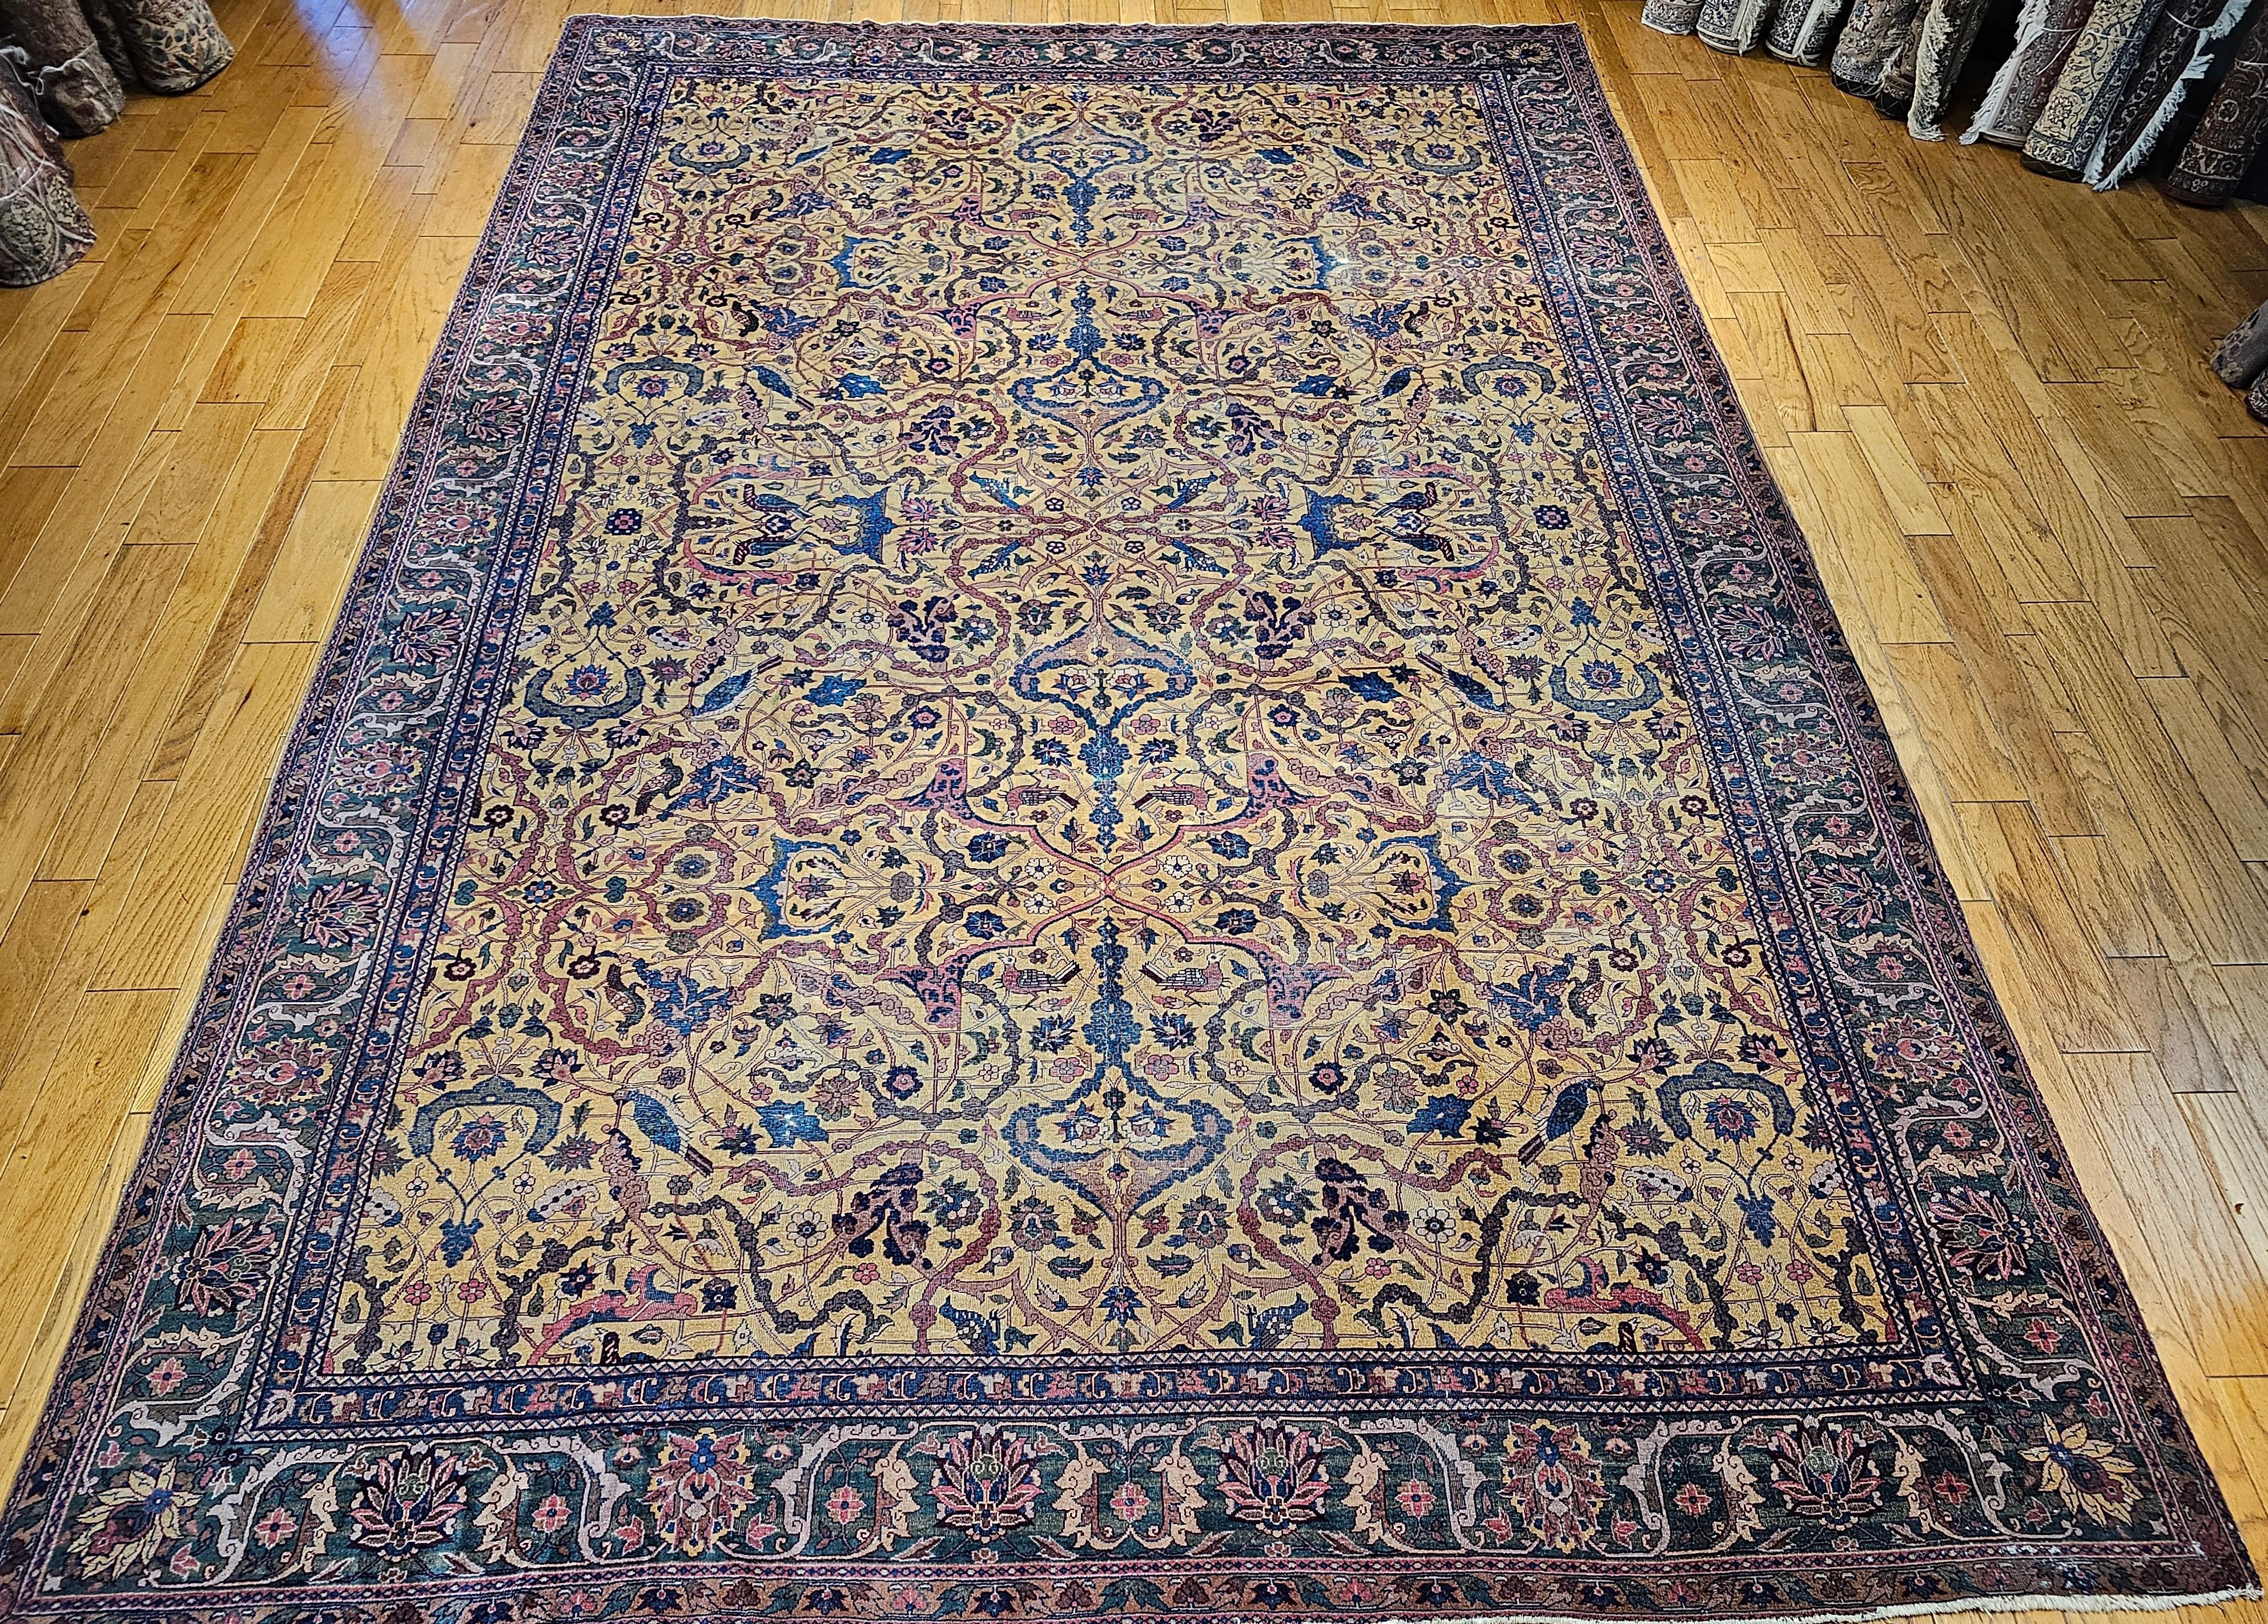 A beautiful hand-knotted Indian Agra woven in the last quarter of the 1900s in an allover garden pattern. The rug has a saffron yellow background color with designs of birds and branches in French blue, pink, red, green, brown and ivory.  The Agra